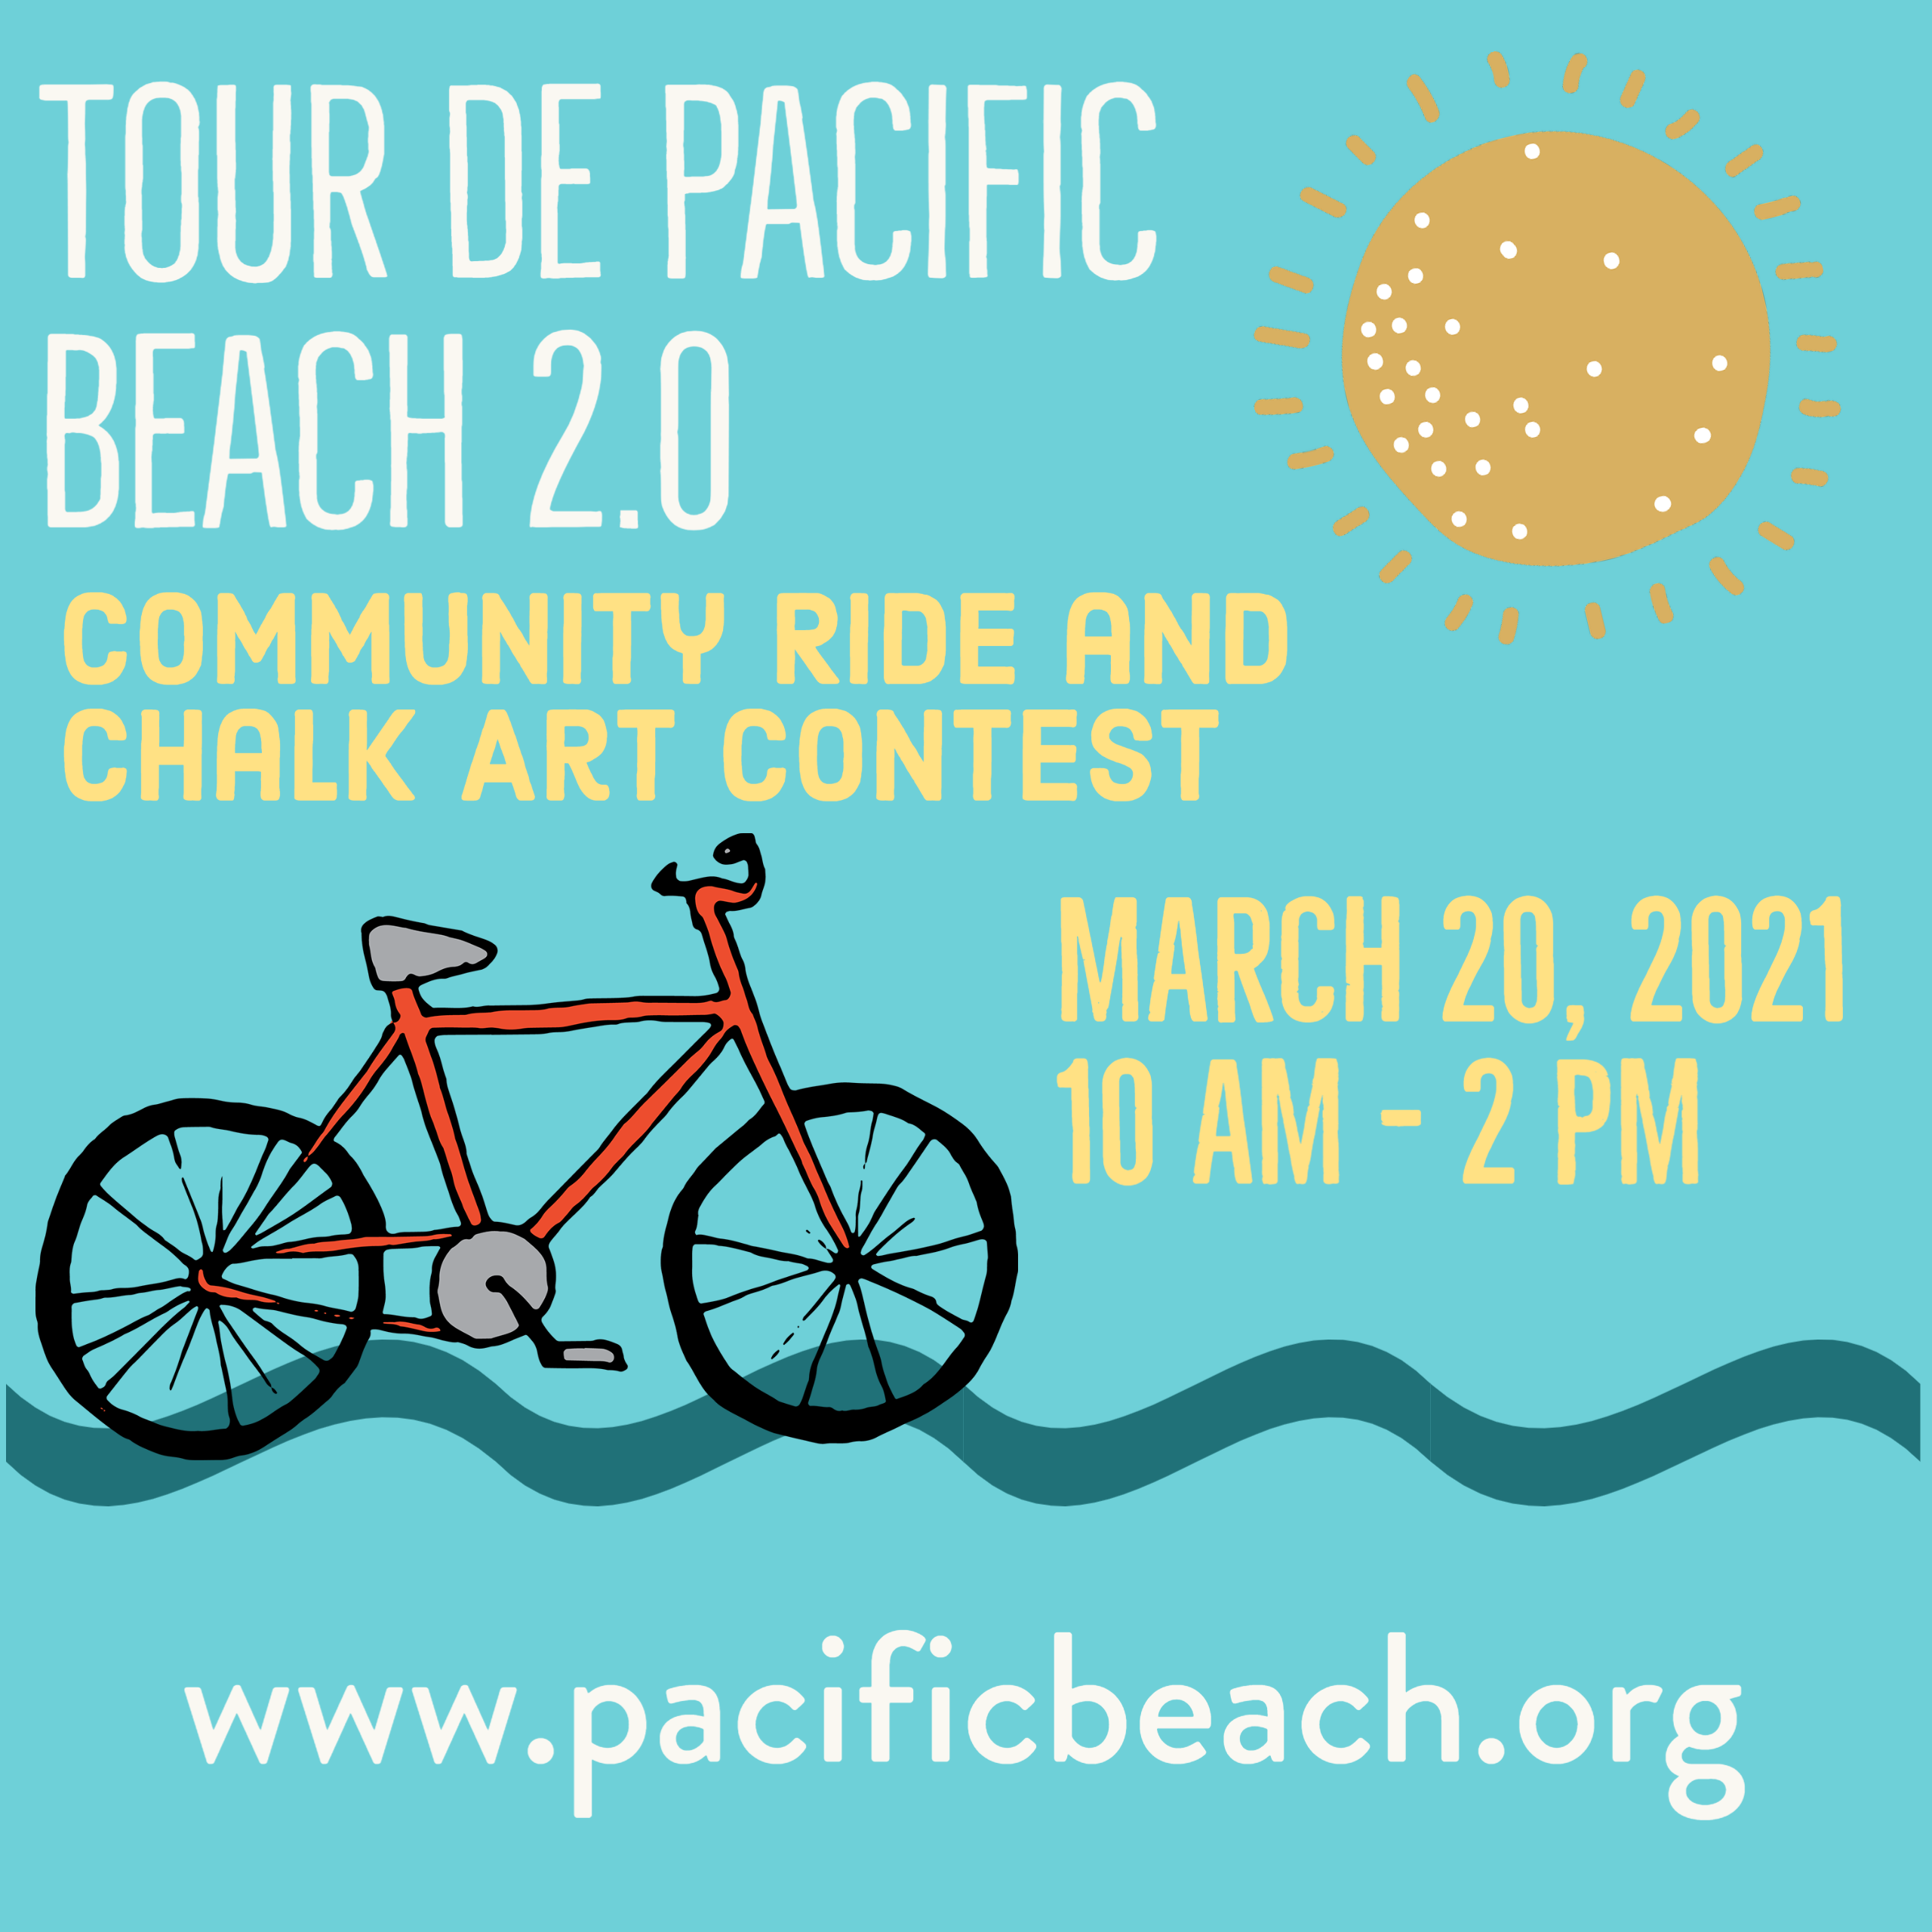 Bicycle on a blue background, with text "Tour de Pacific Beach 2.0"